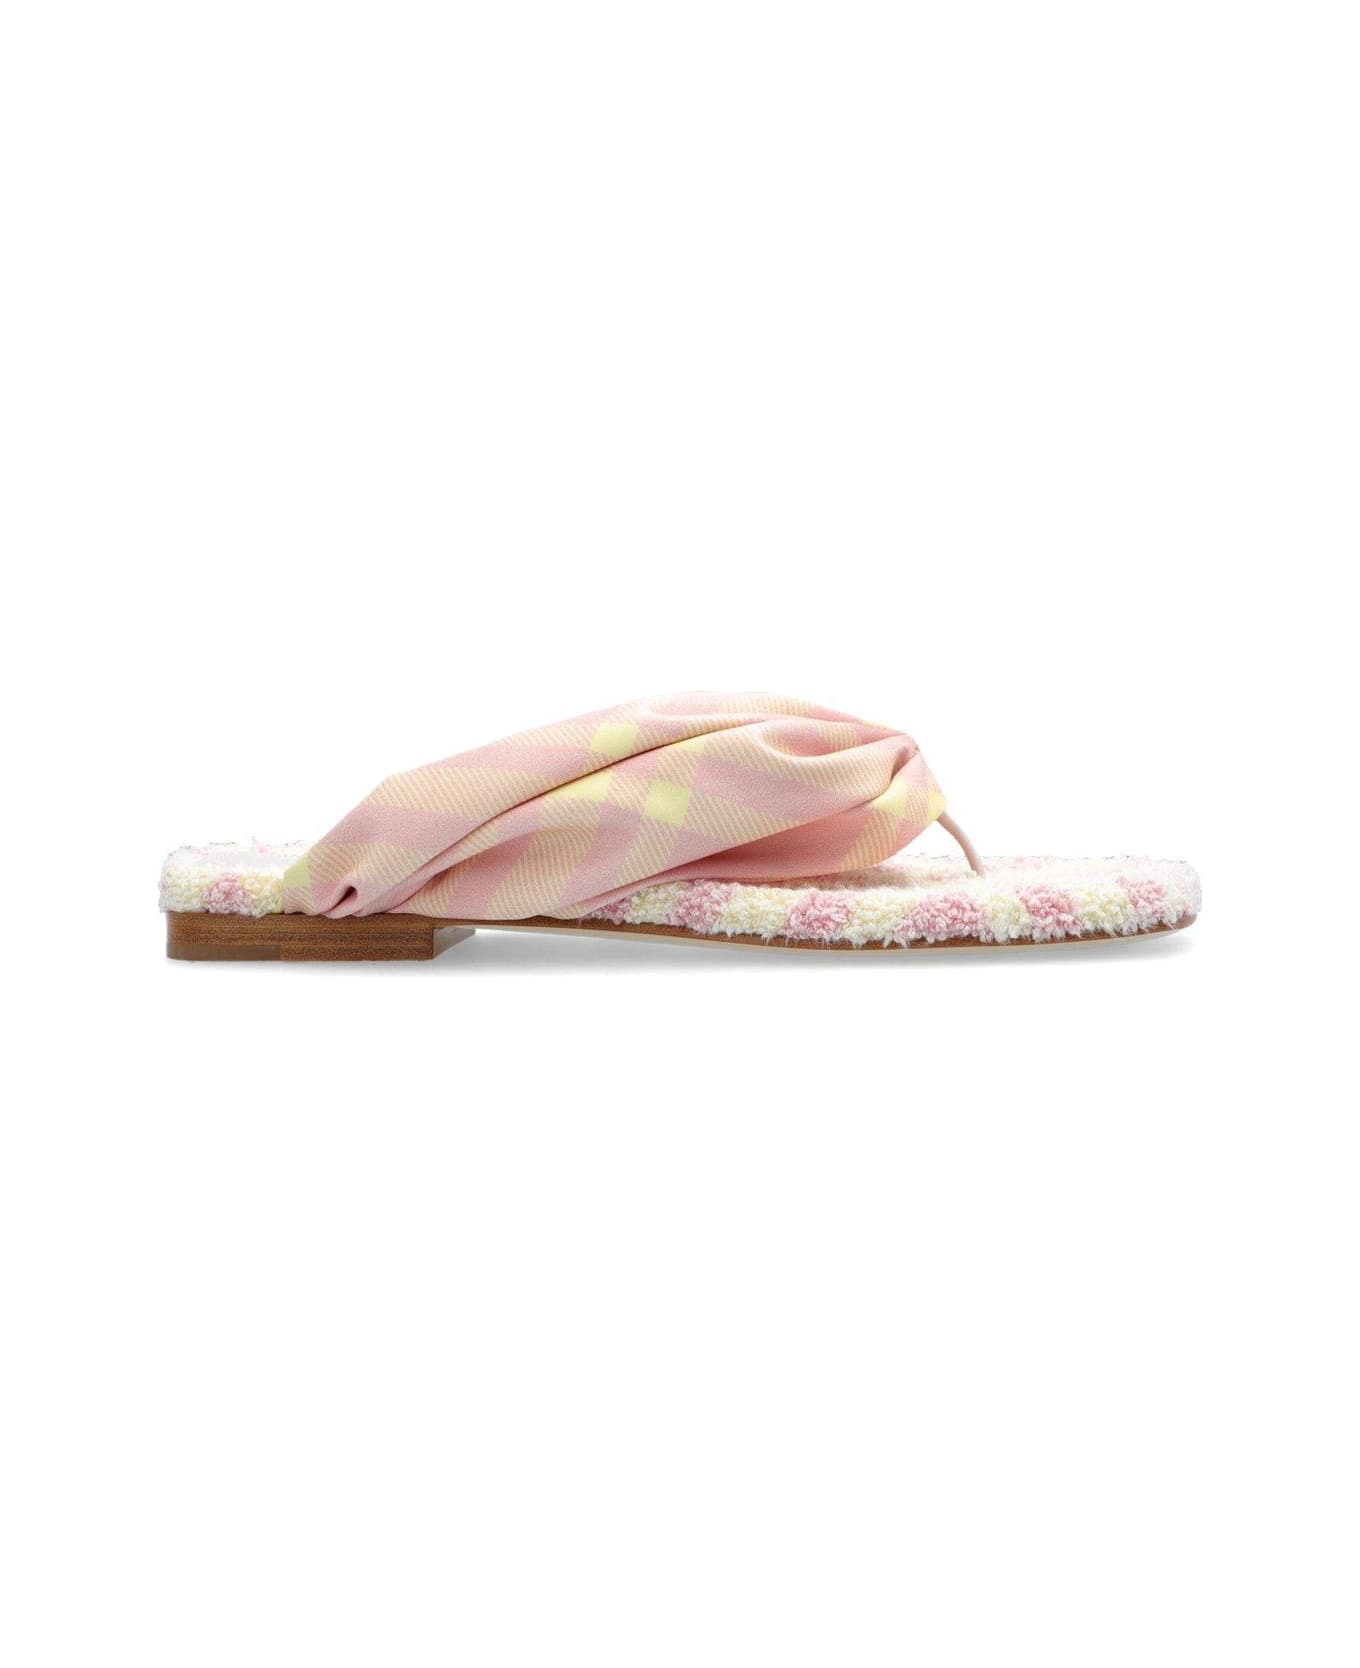 Burberry Check Printed Open-toe Flat Sandals - White